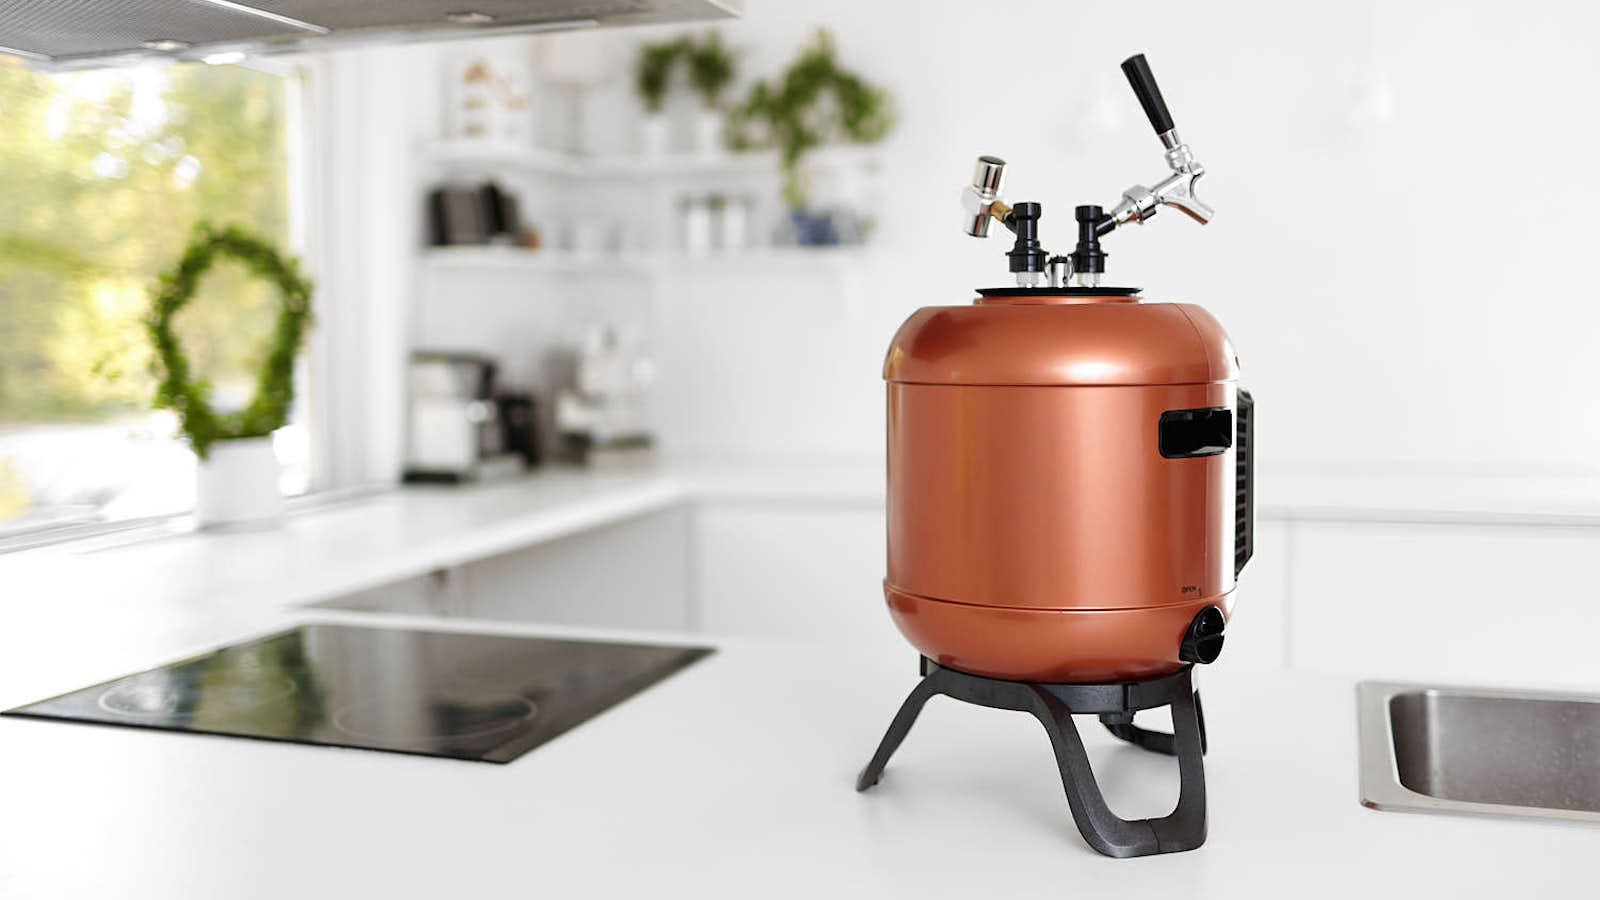 MiniBrew Craft smart beer machine is an all-in-one brewer